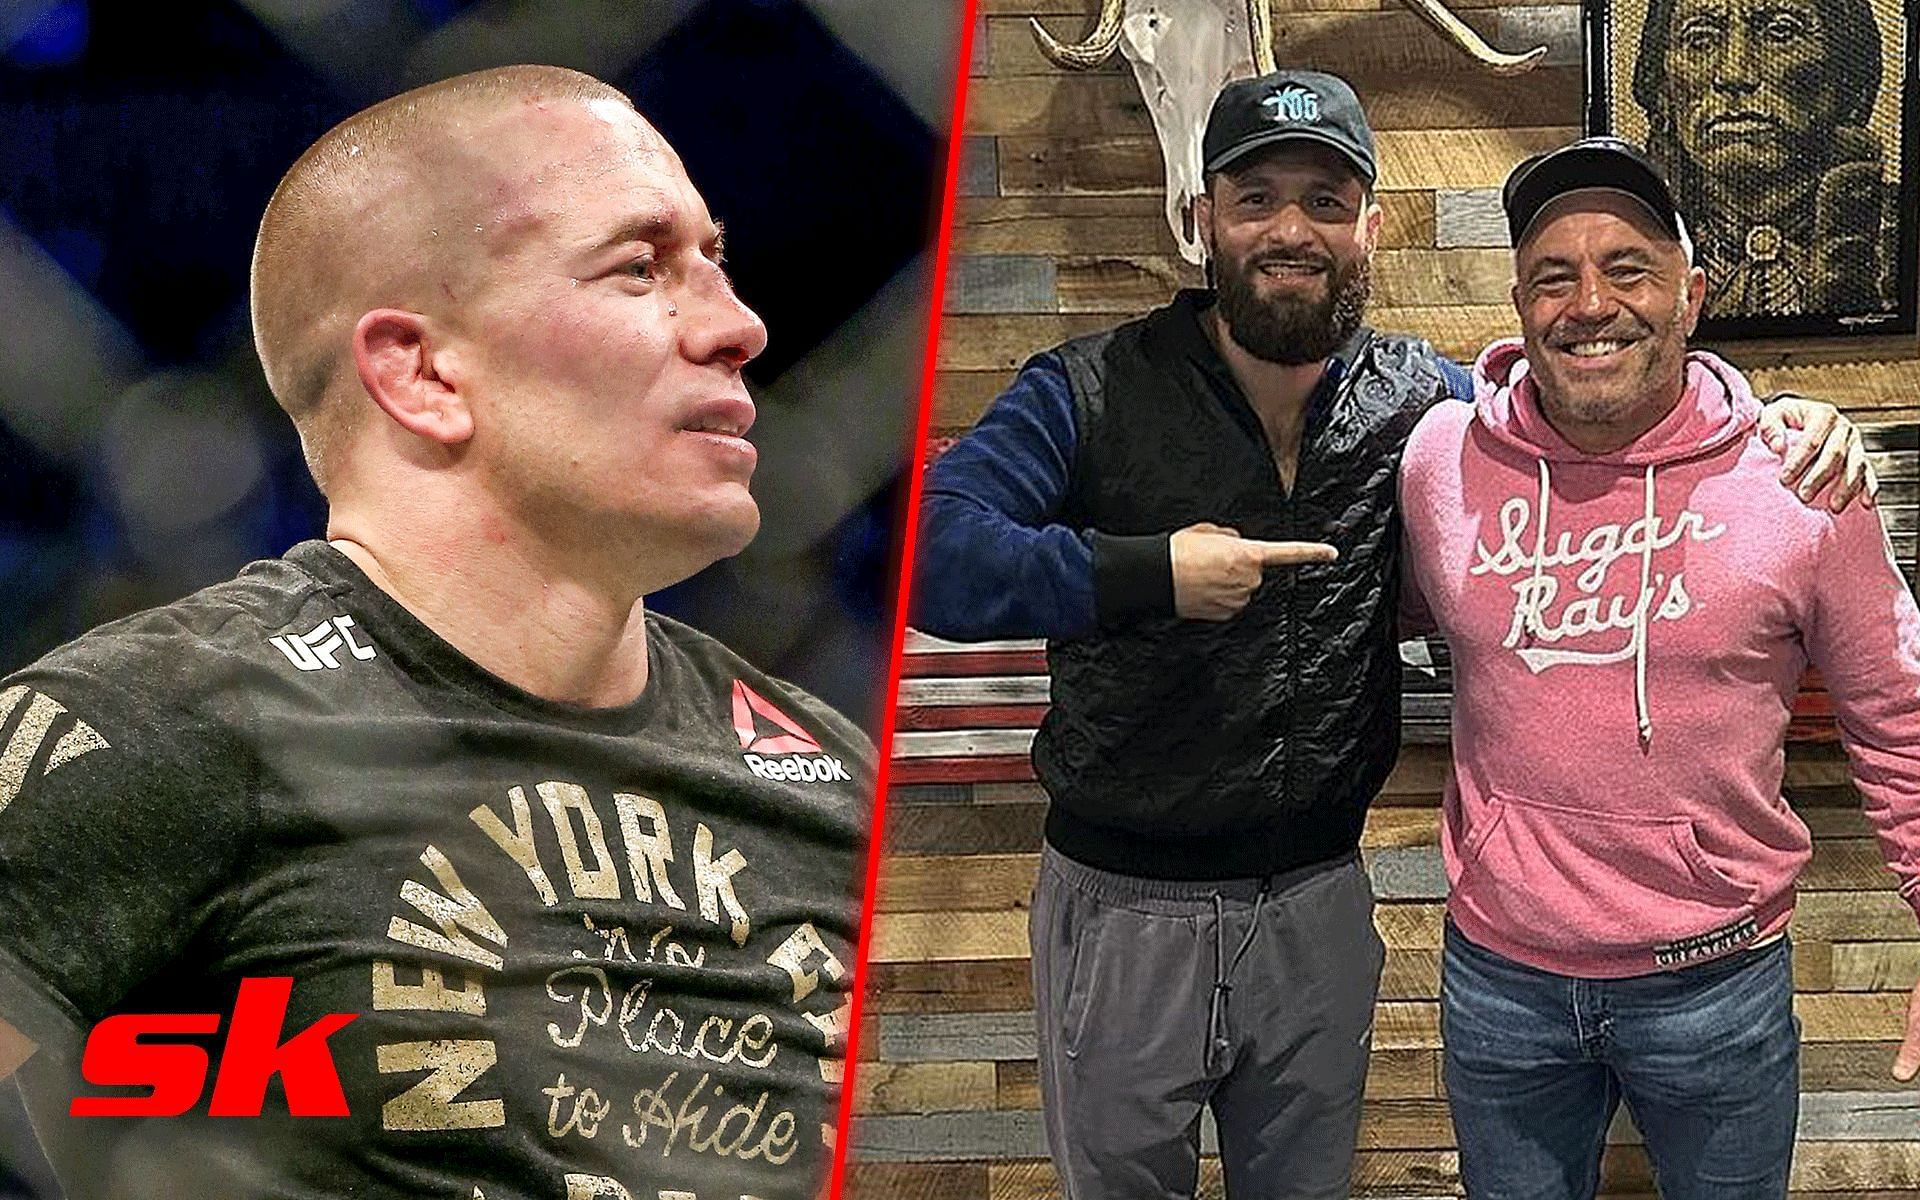 Georges St-Pierre (left) and Jorge Masvidal with Joe Rogan (right) [Image credits: Getty Images and @gamebredfighter on Instagram]